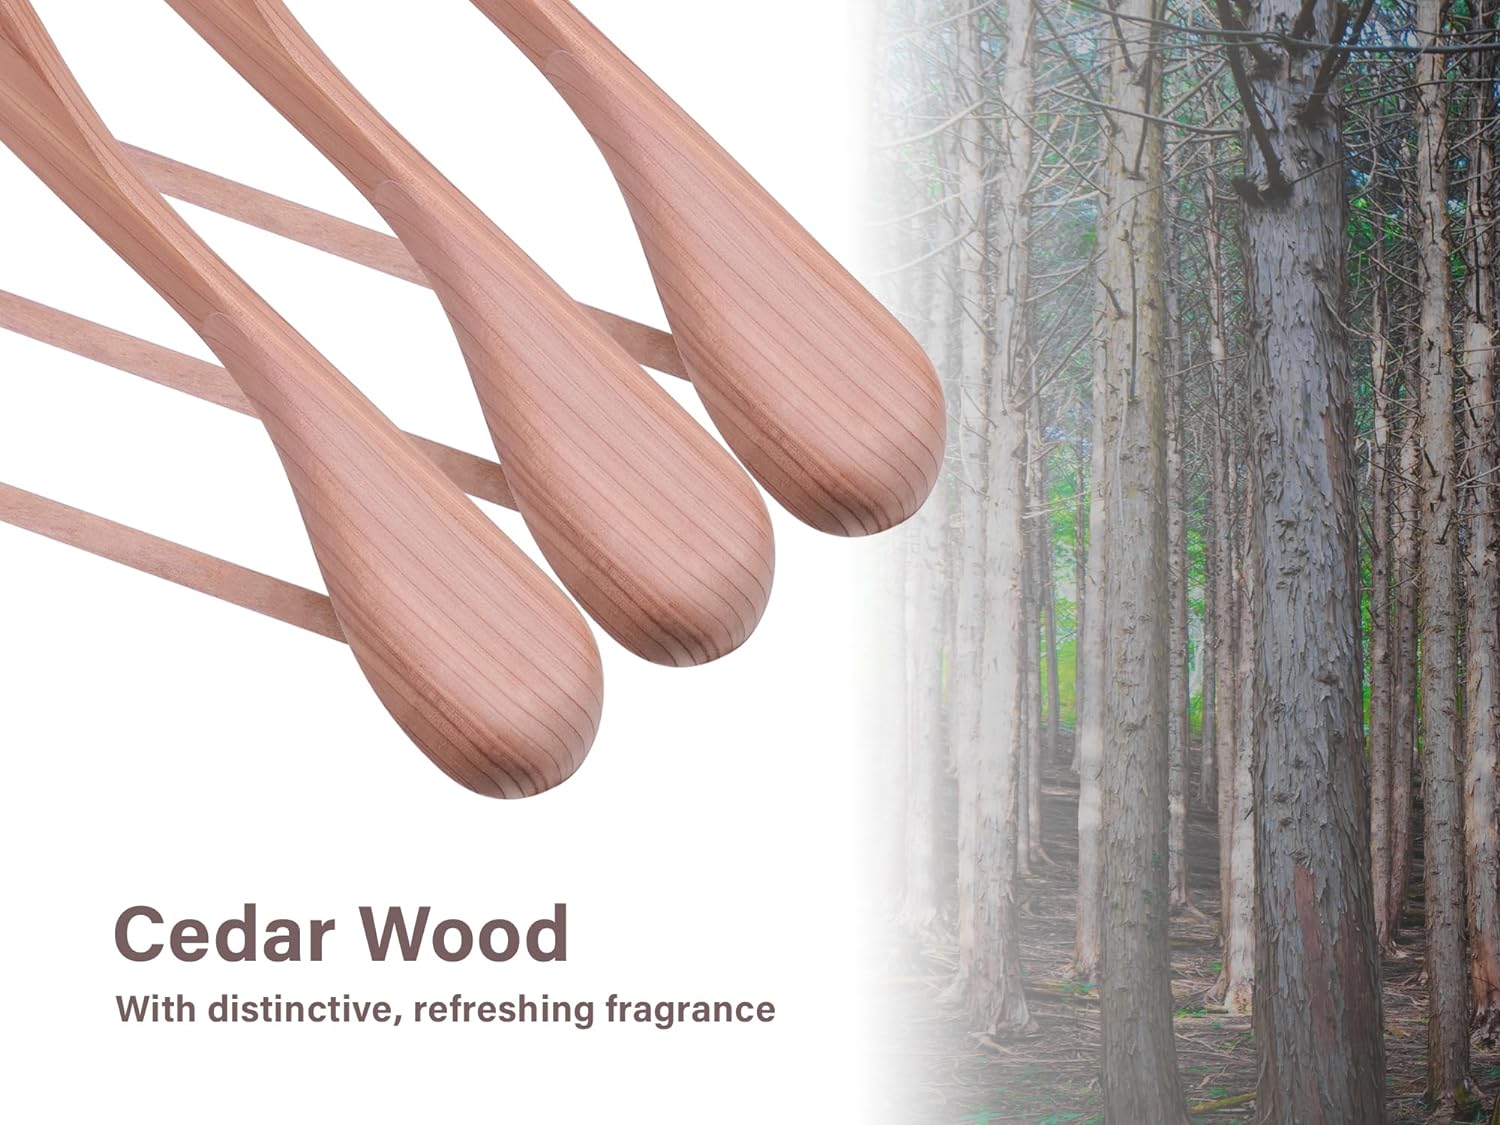 Cedarwood hangers have distinctive, refreshing fragrance that dispel insects.